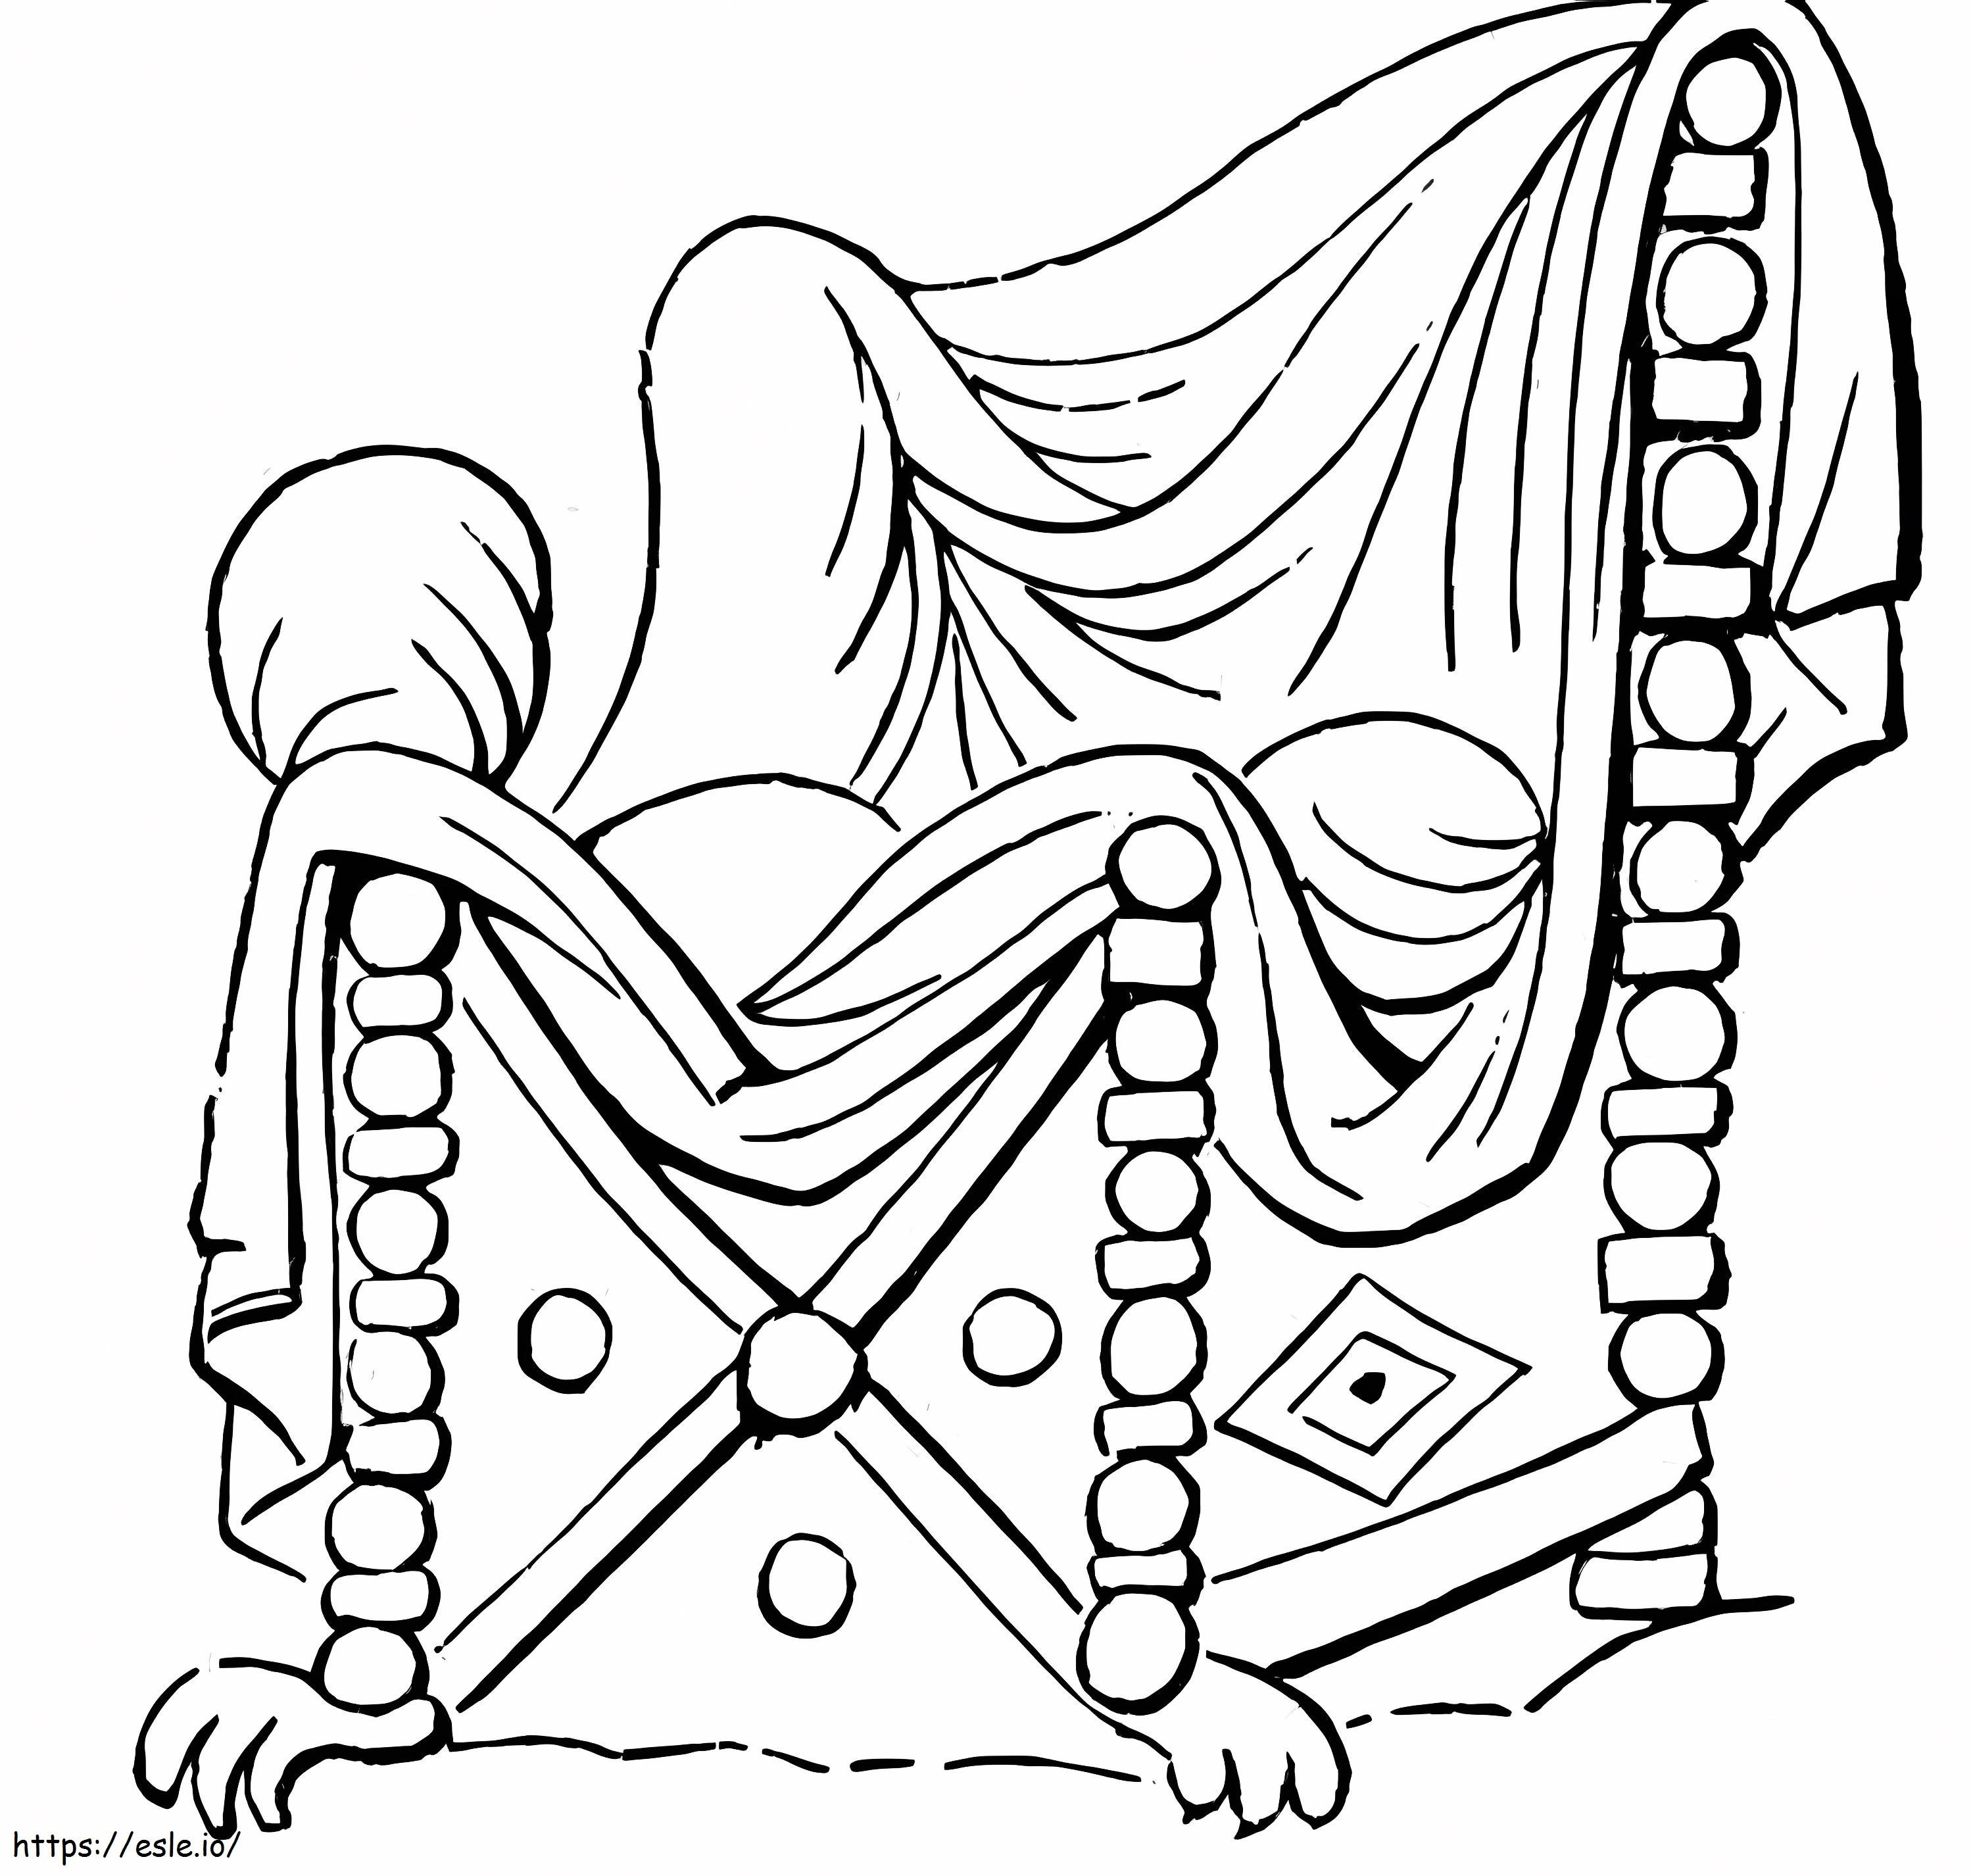 Luxury Chair coloring page